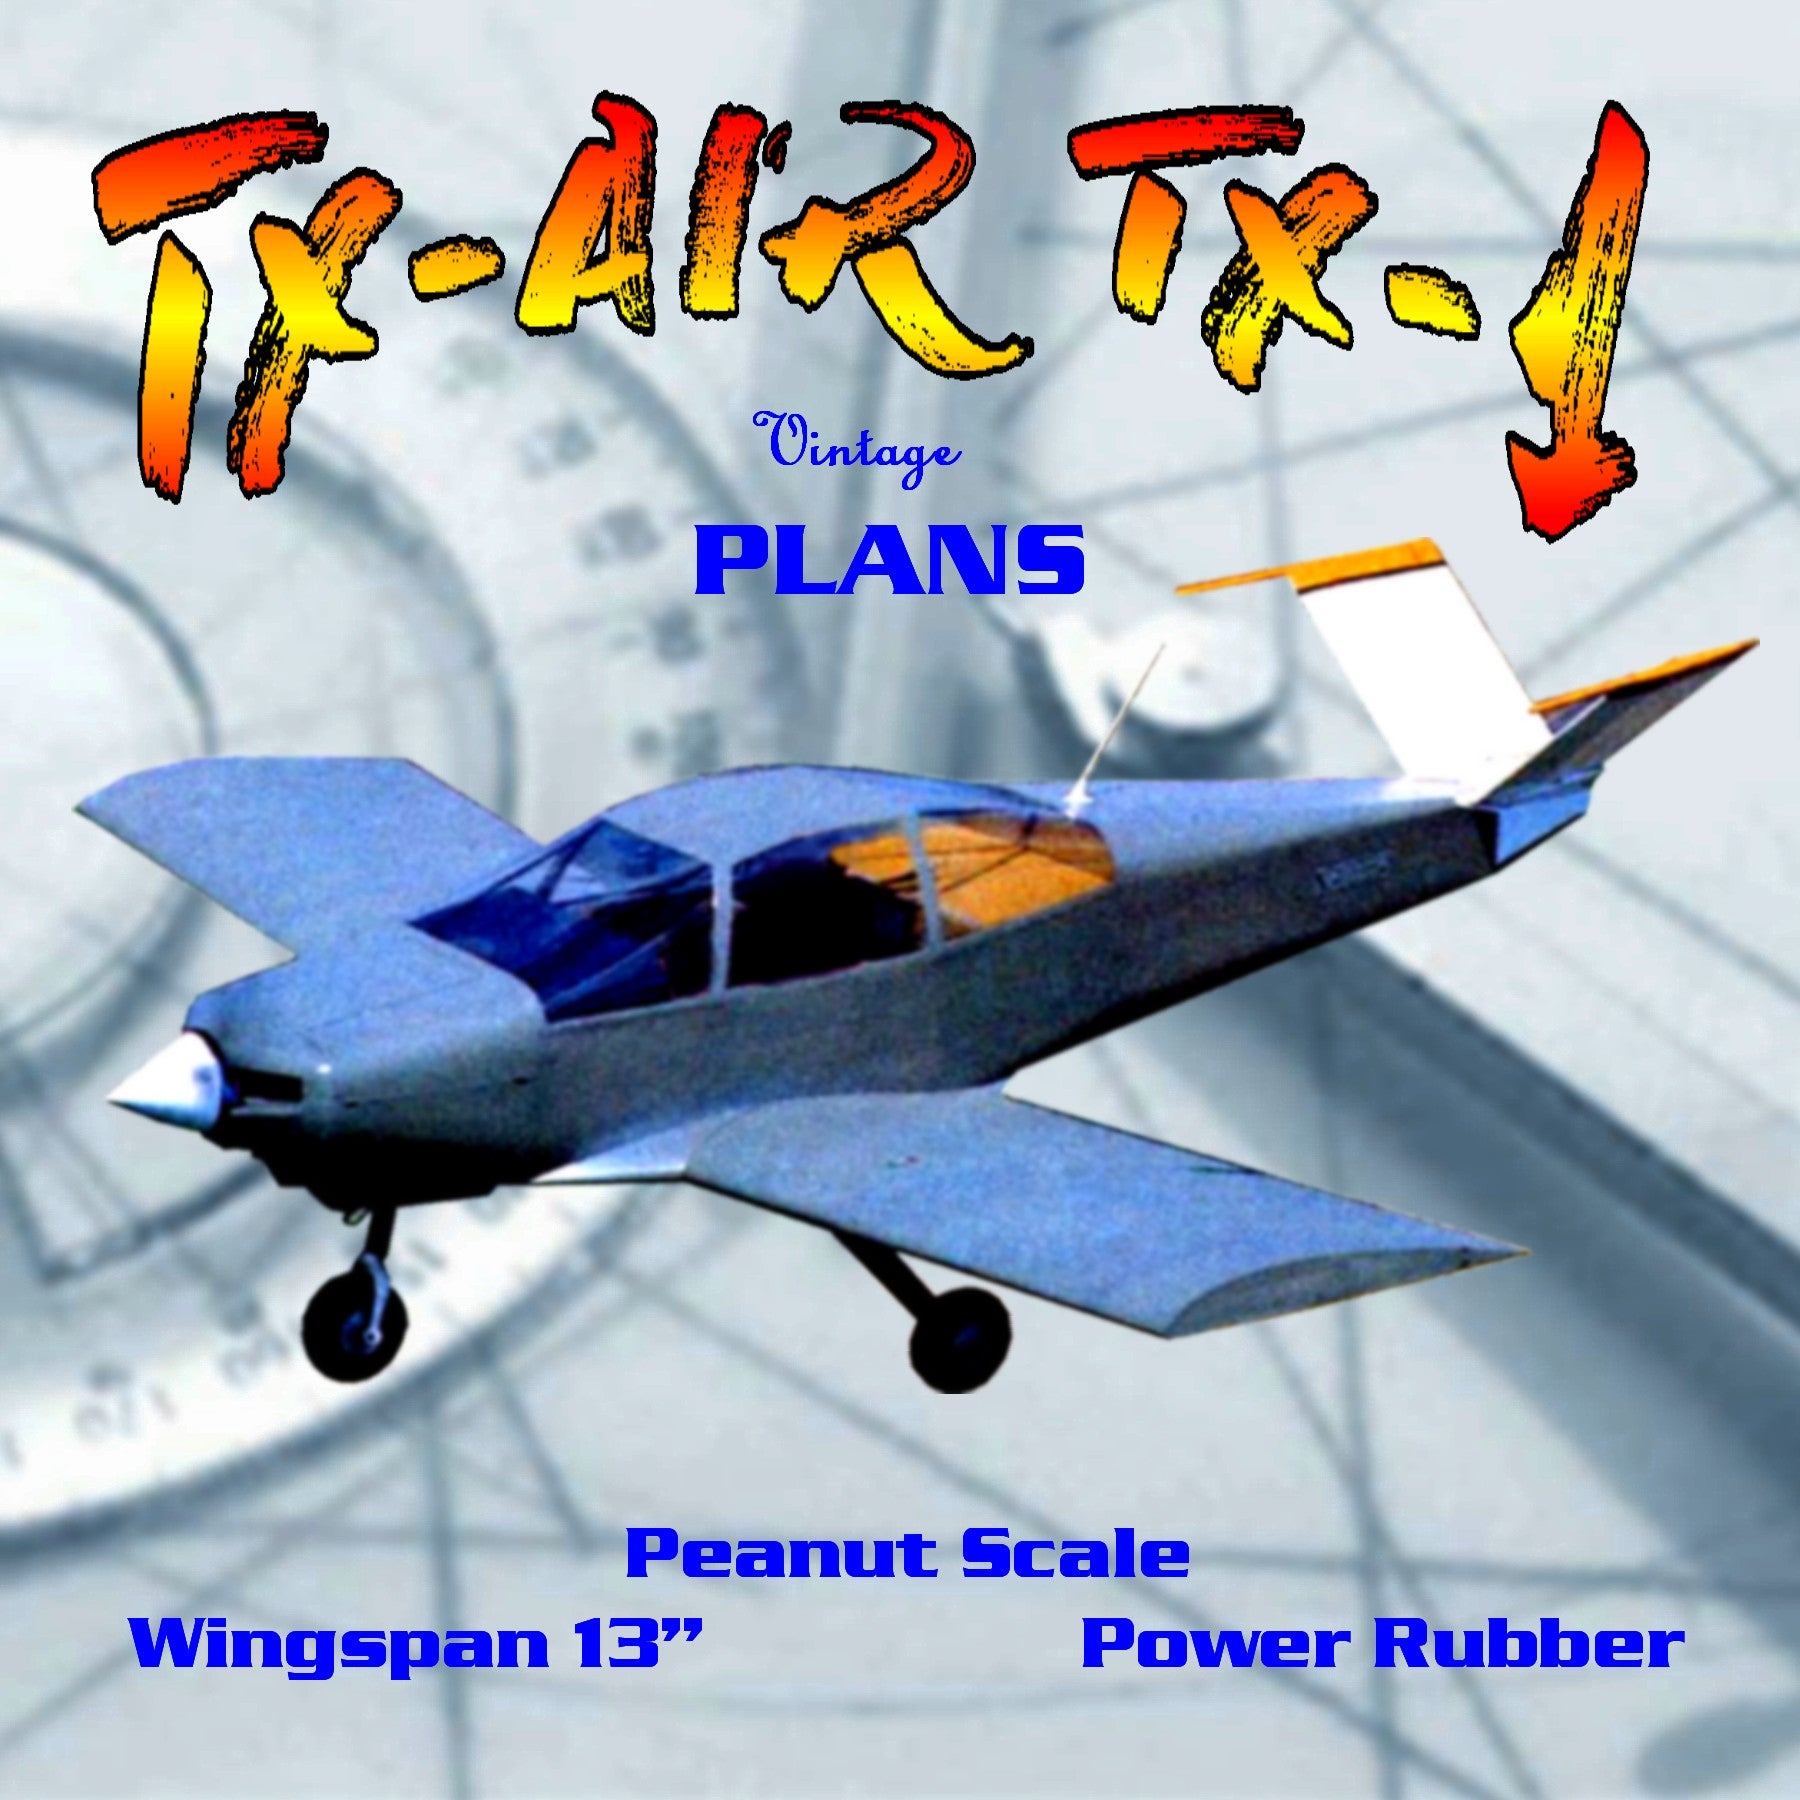 full size printed plans peanut scale "tx-air tx-1" is much more eye-appealing with rounded lines